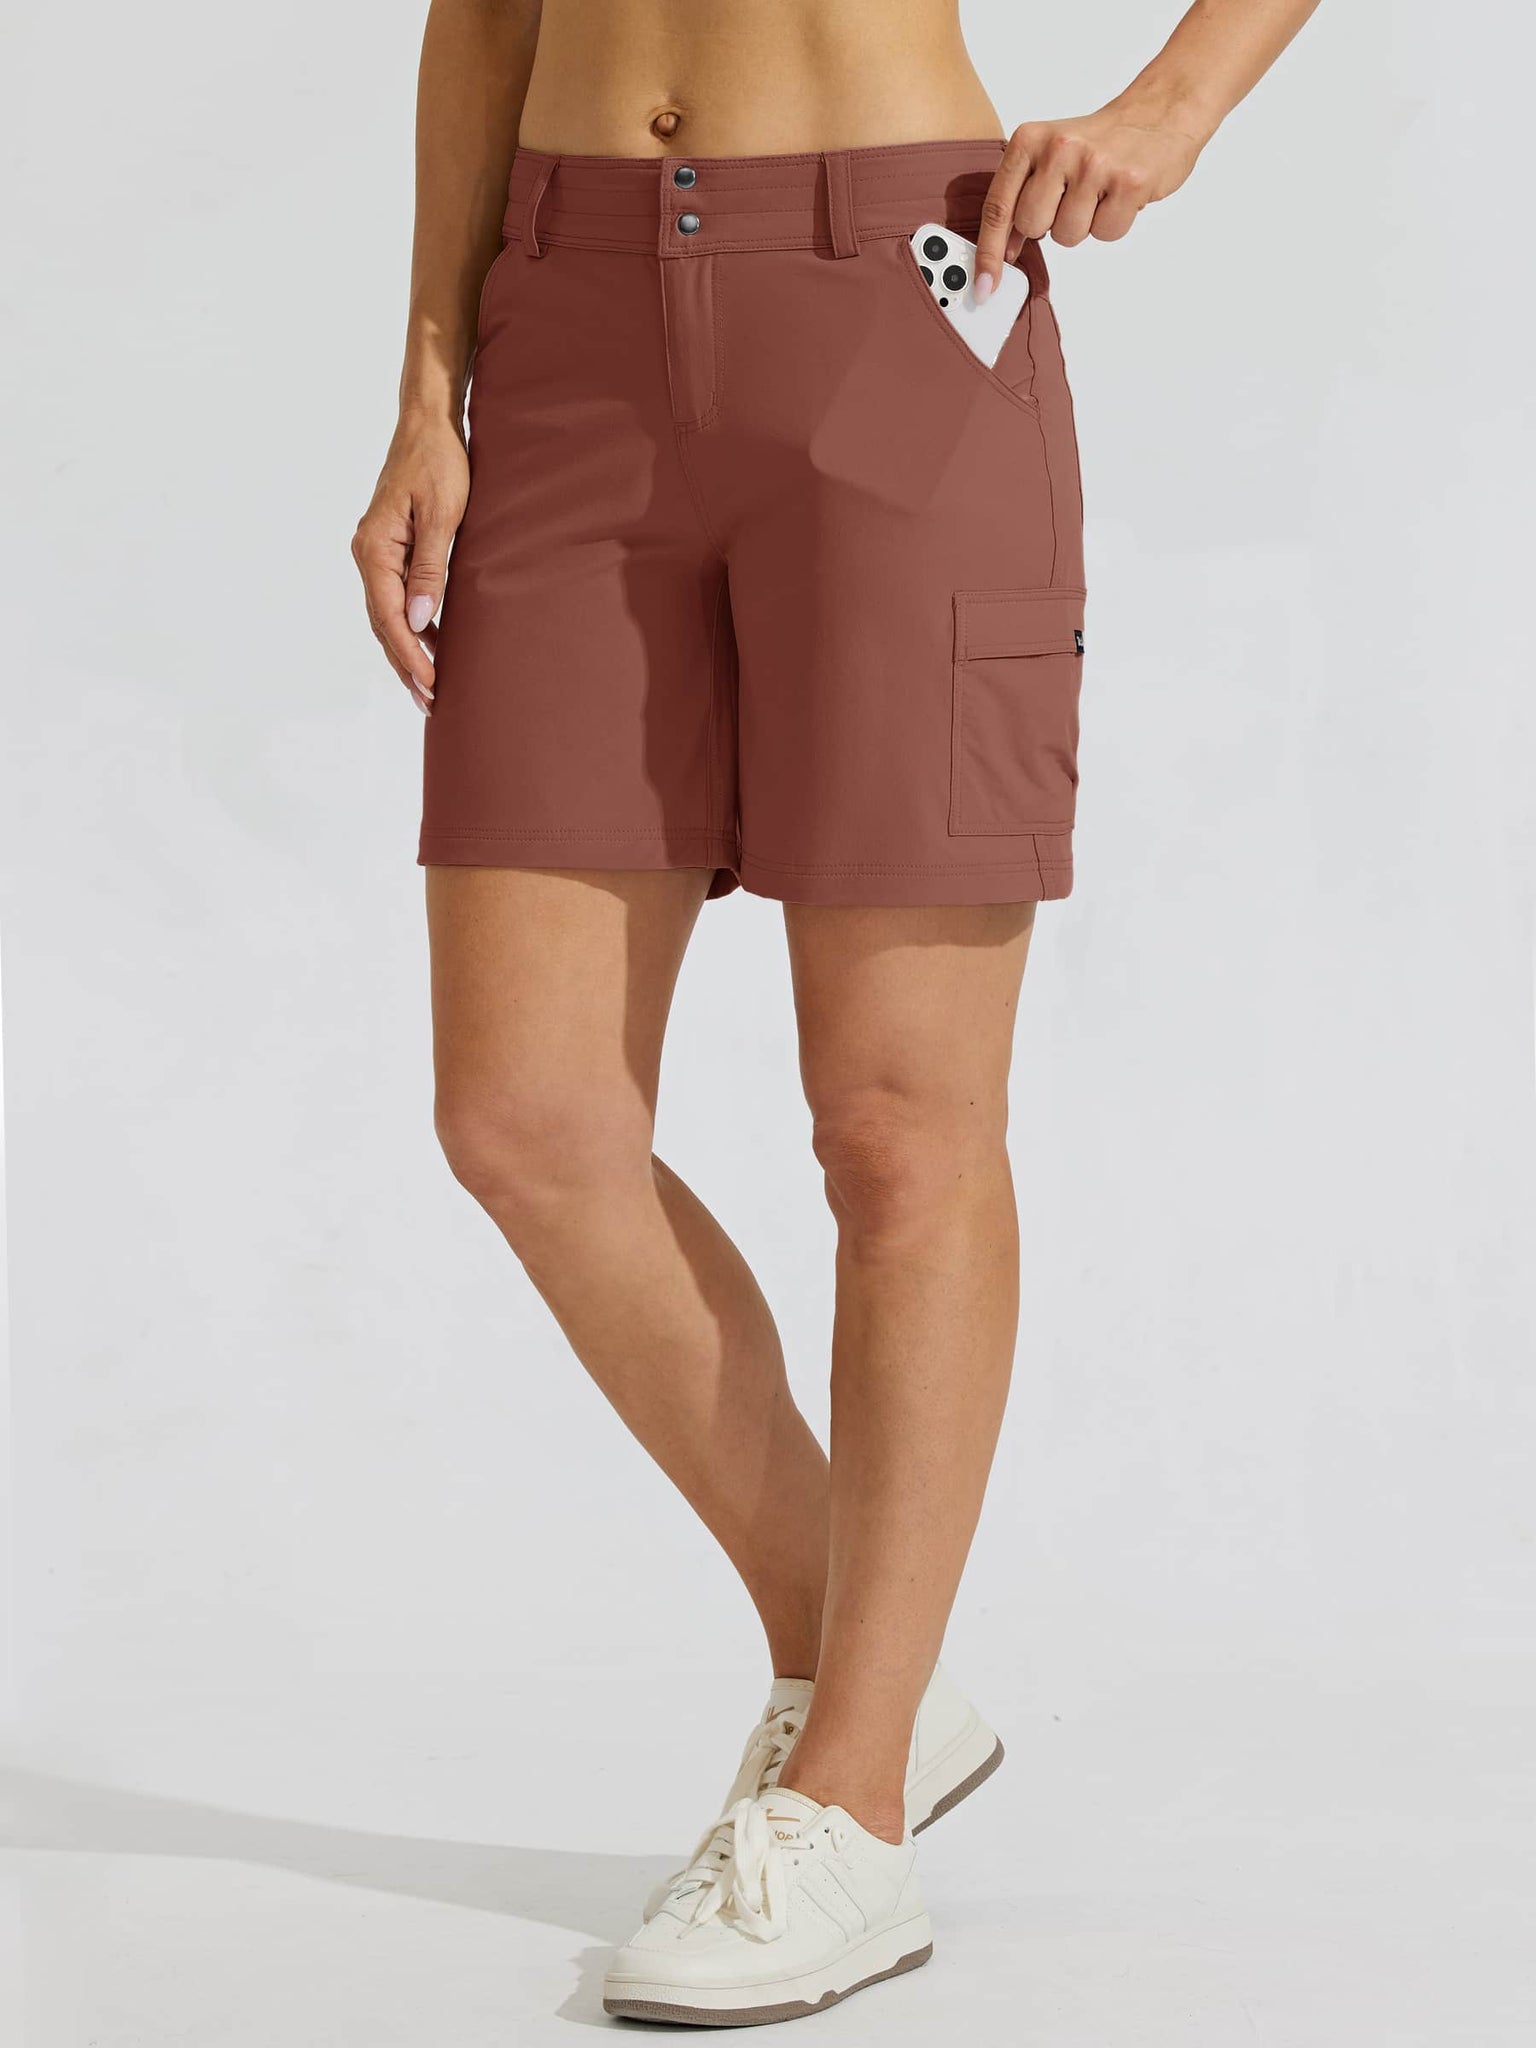 Women's Outdoor Pro Shorts Cacao_model1